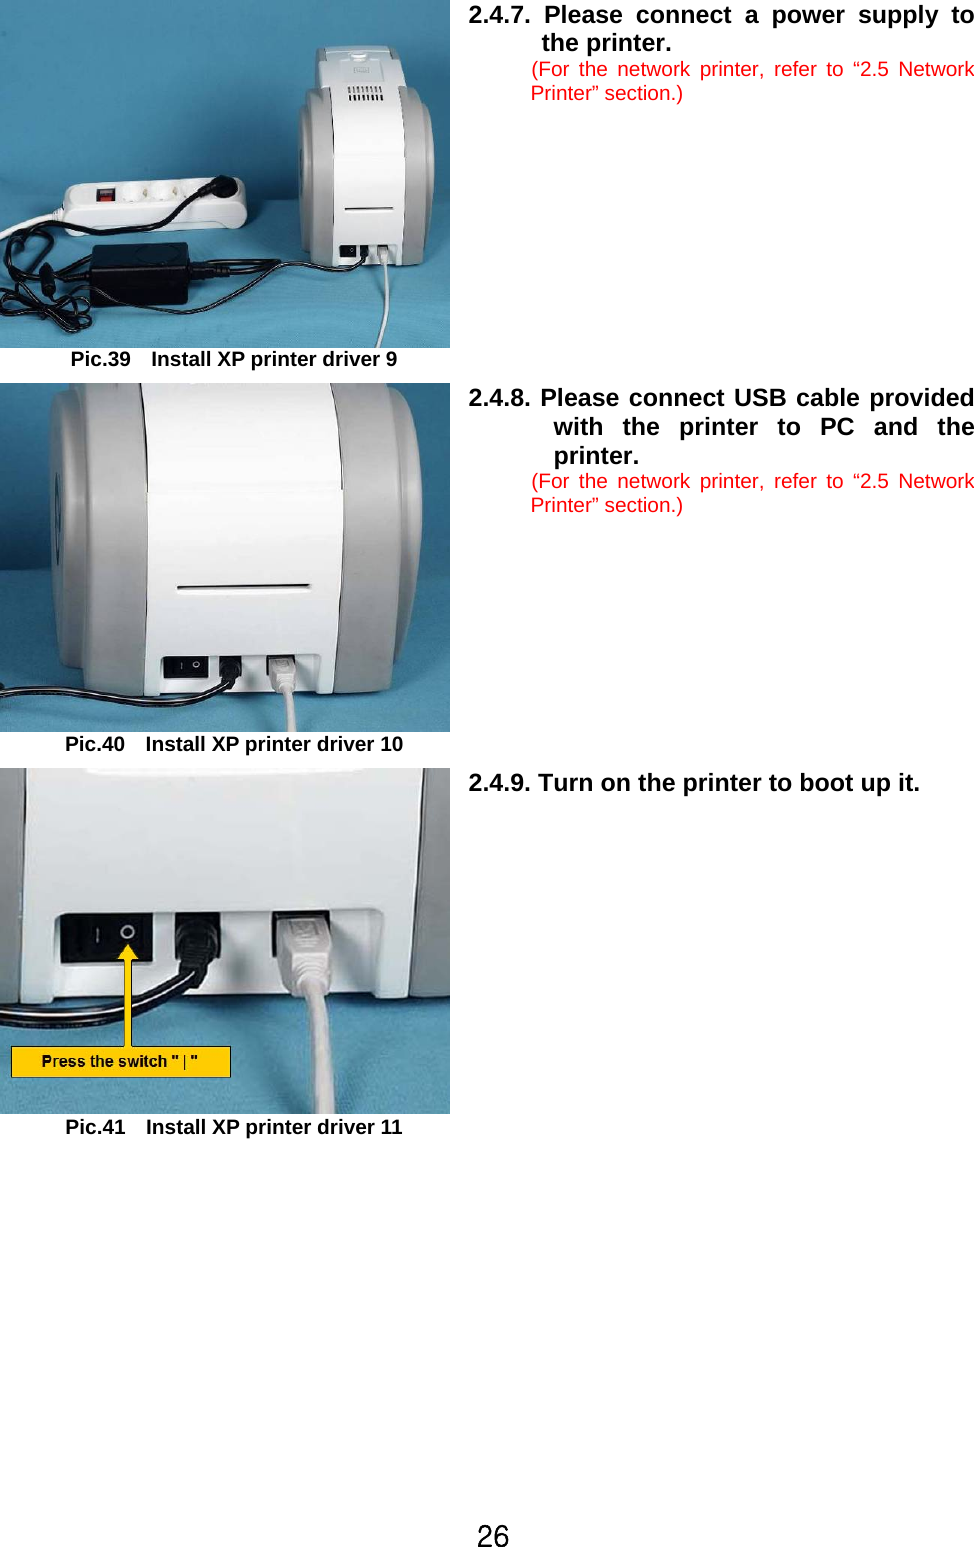 26  Pic.39    Install XP printer driver 9 2.4.7. Please connect a power supply to the printer. (For the network printer, refer to “2.5 Network Printer” section.)   Pic.40    Install XP printer driver 10 2.4.8. Please connect USB cable provided with the printer to PC and the printer. (For the network printer, refer to “2.5 Network Printer” section.)   Pic.41    Install XP printer driver 11 2.4.9. Turn on the printer to boot up it.  